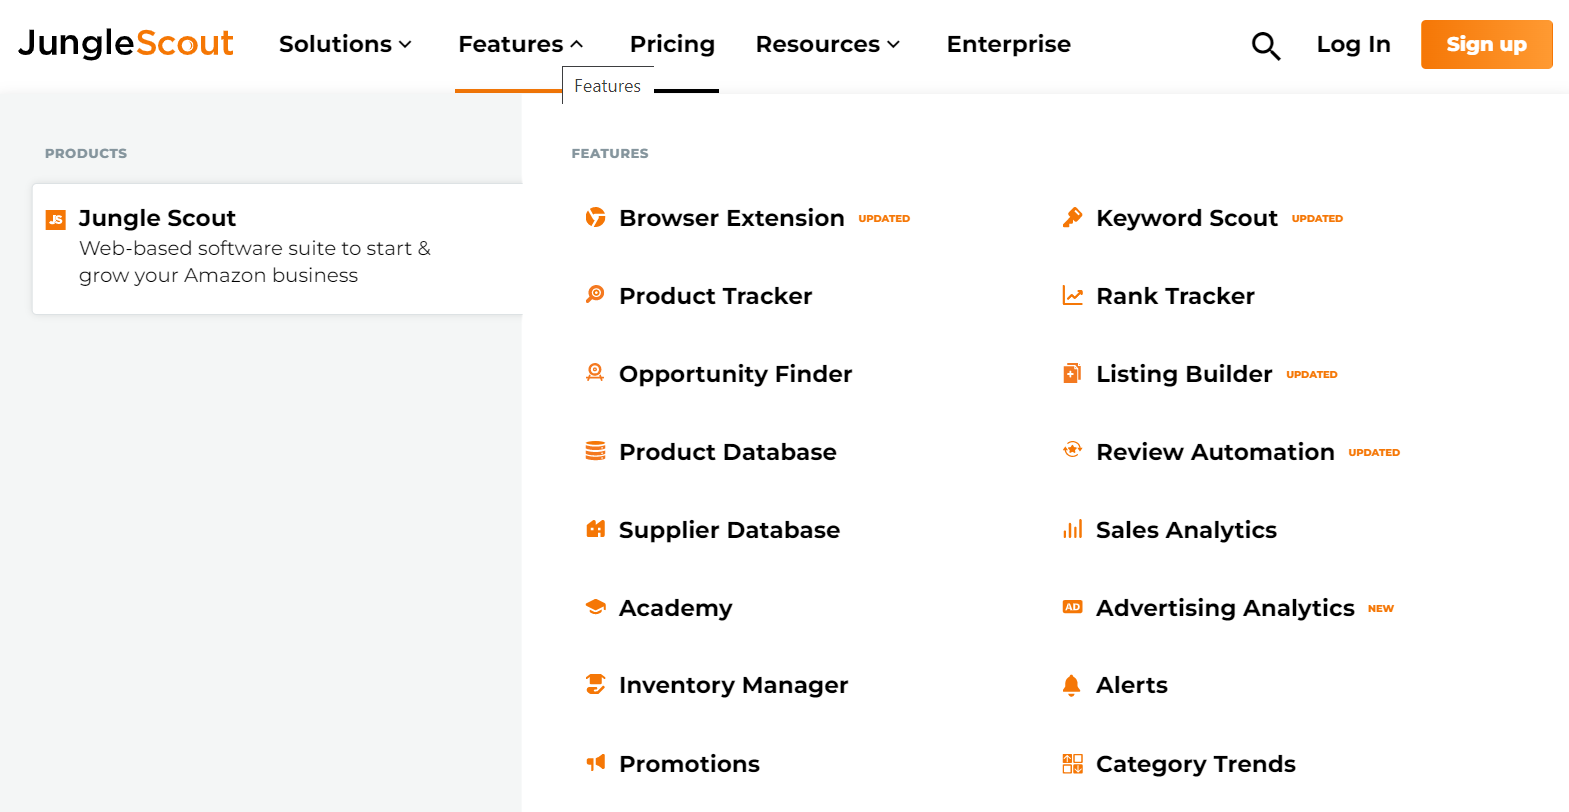 Jungel Scout features for product research and keyword research to help find profitable products